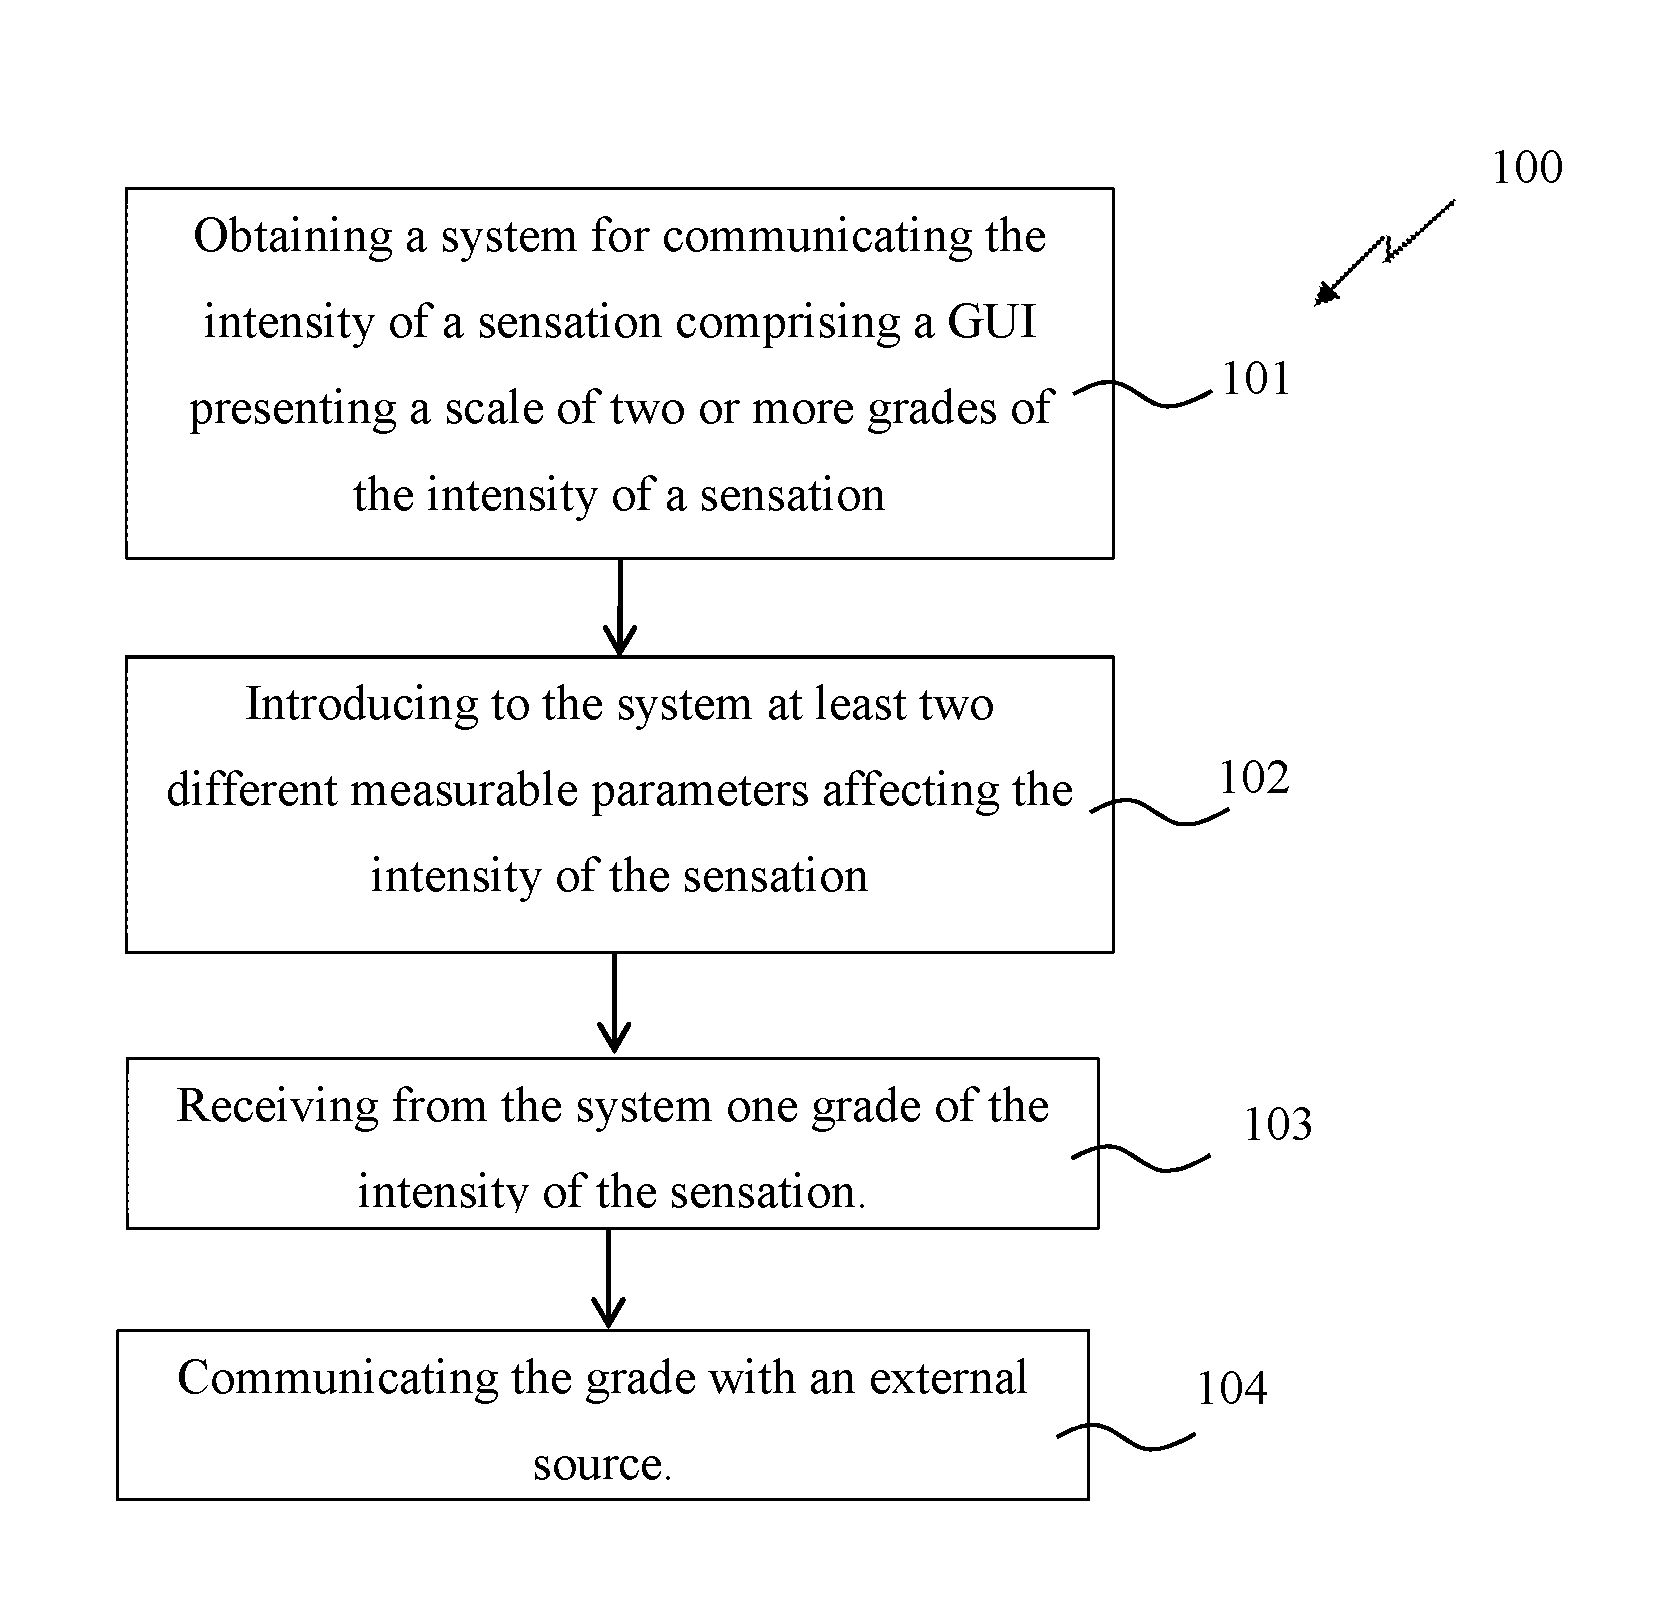 Methods and systems for communicating a sensation